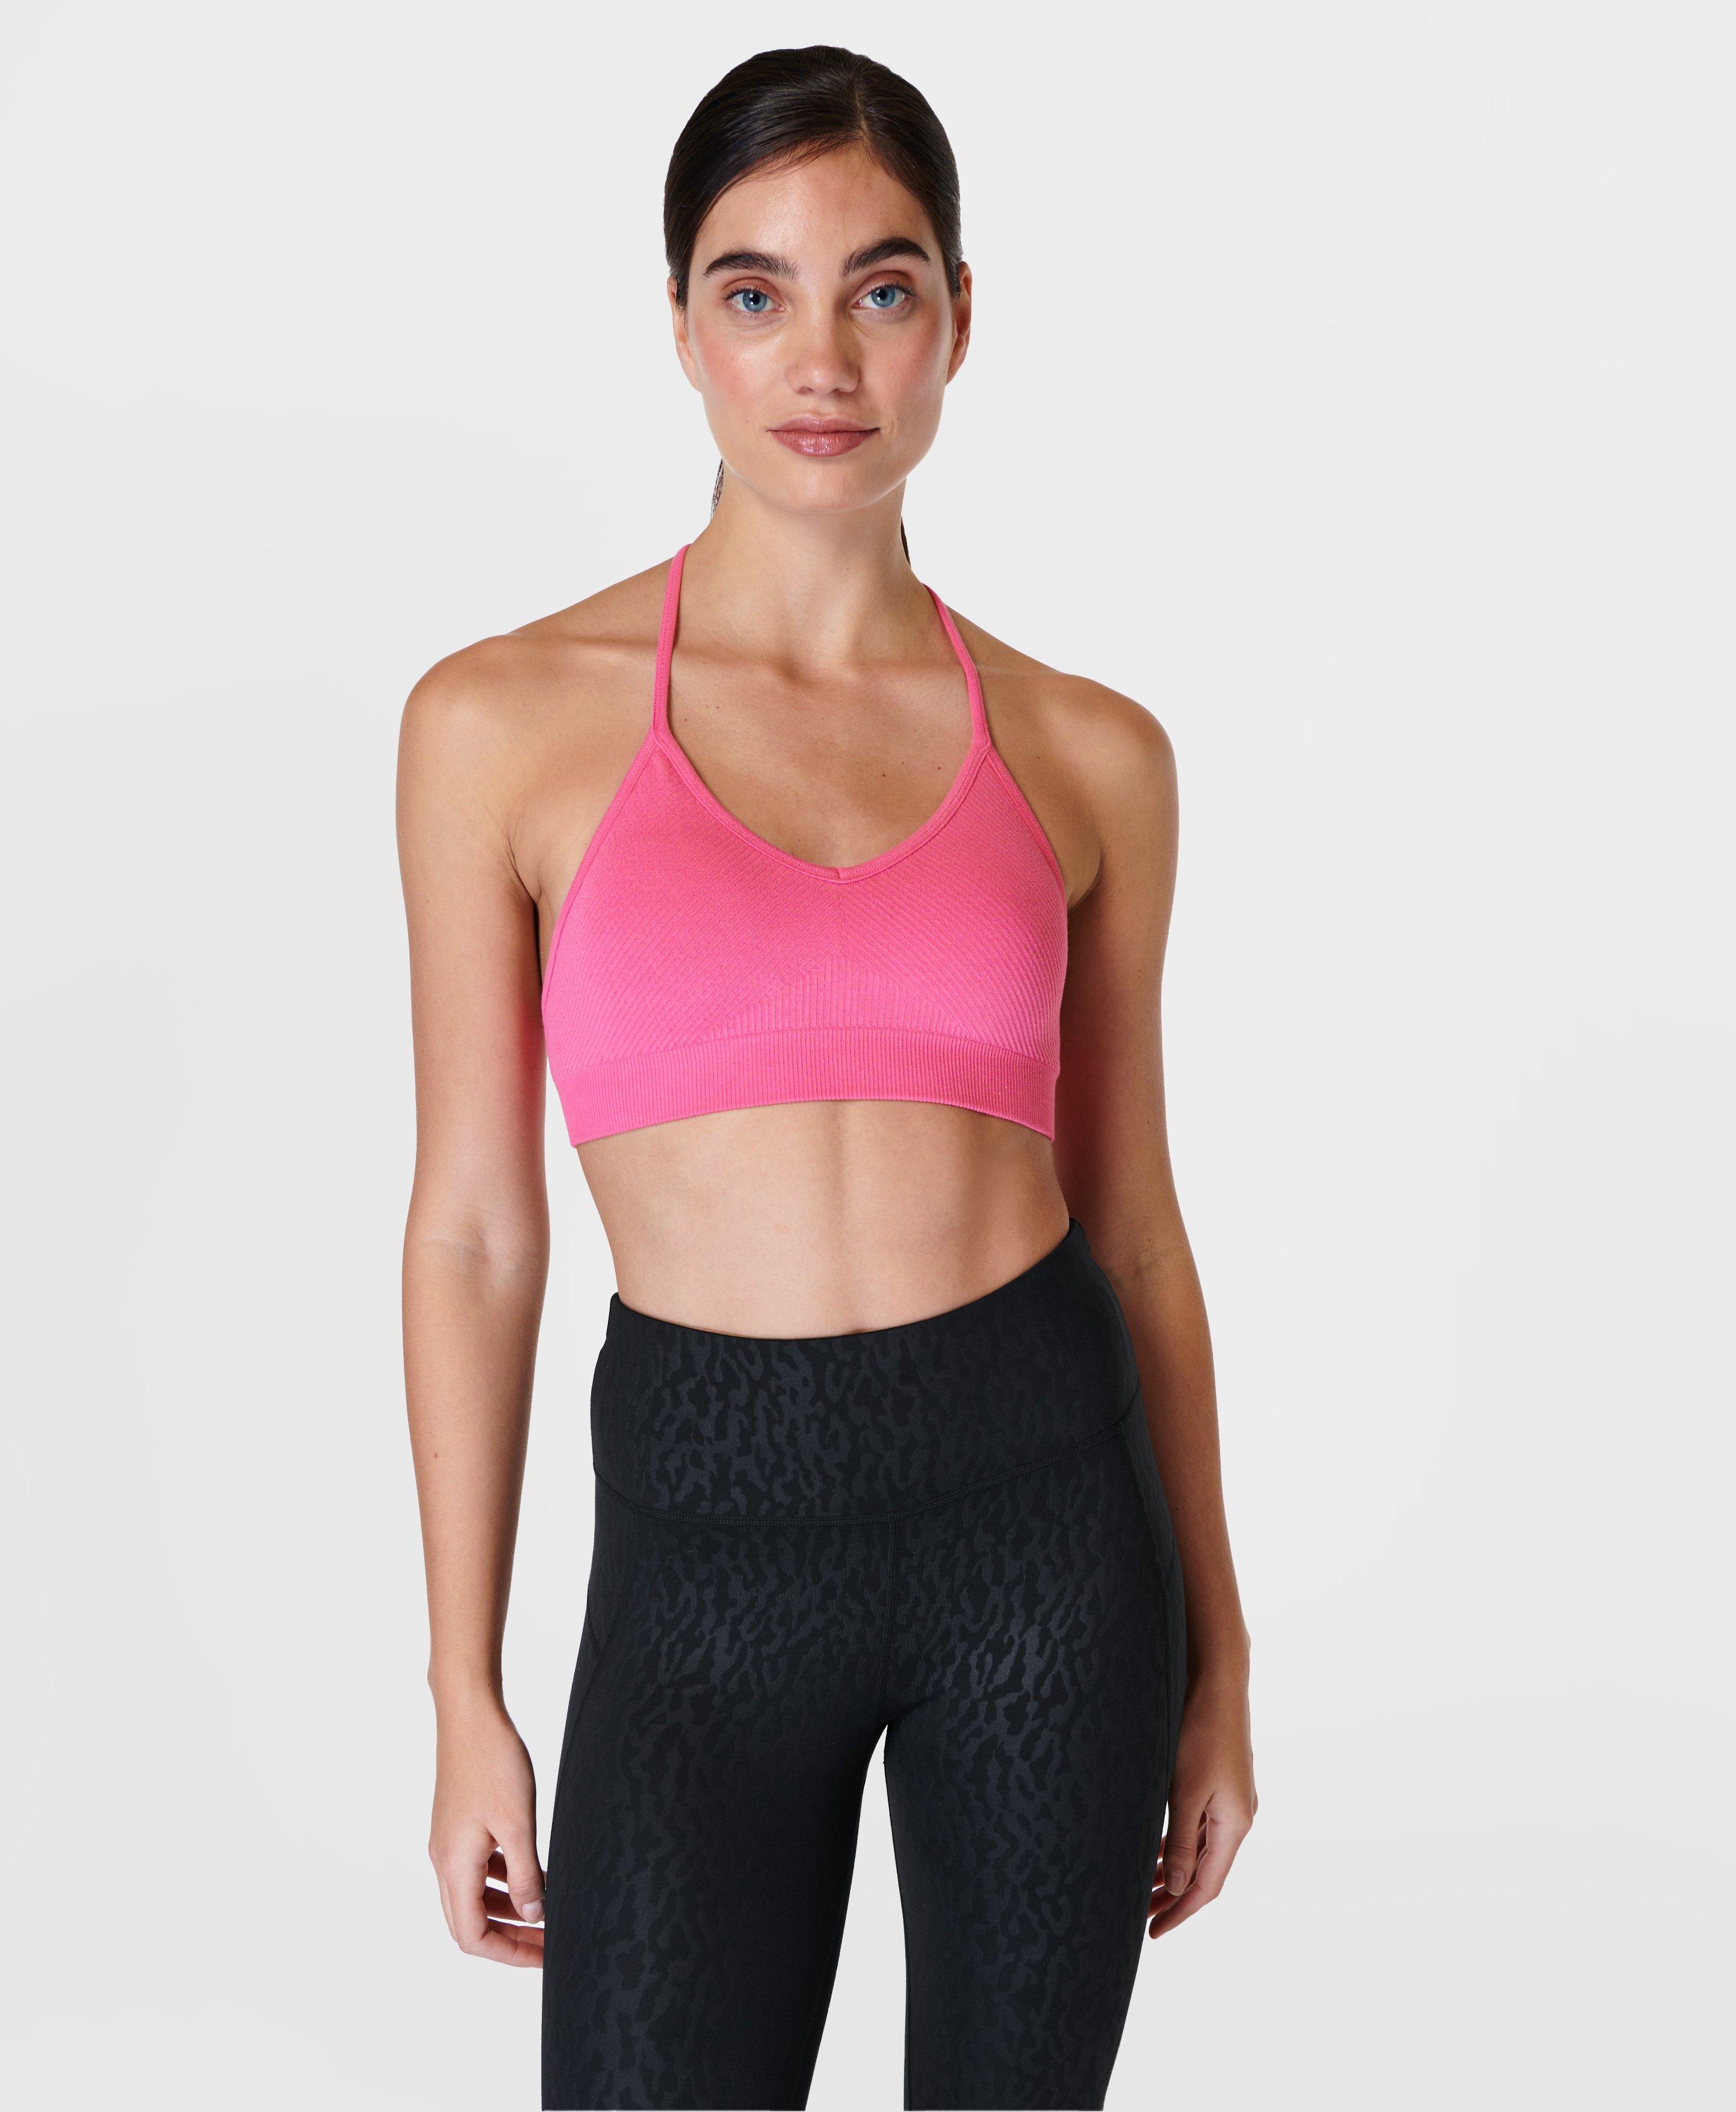 Step-up your game! Sweaty Betty launches THREE new workout bras for all  impact levels - and it could be the secret to your best ever workout